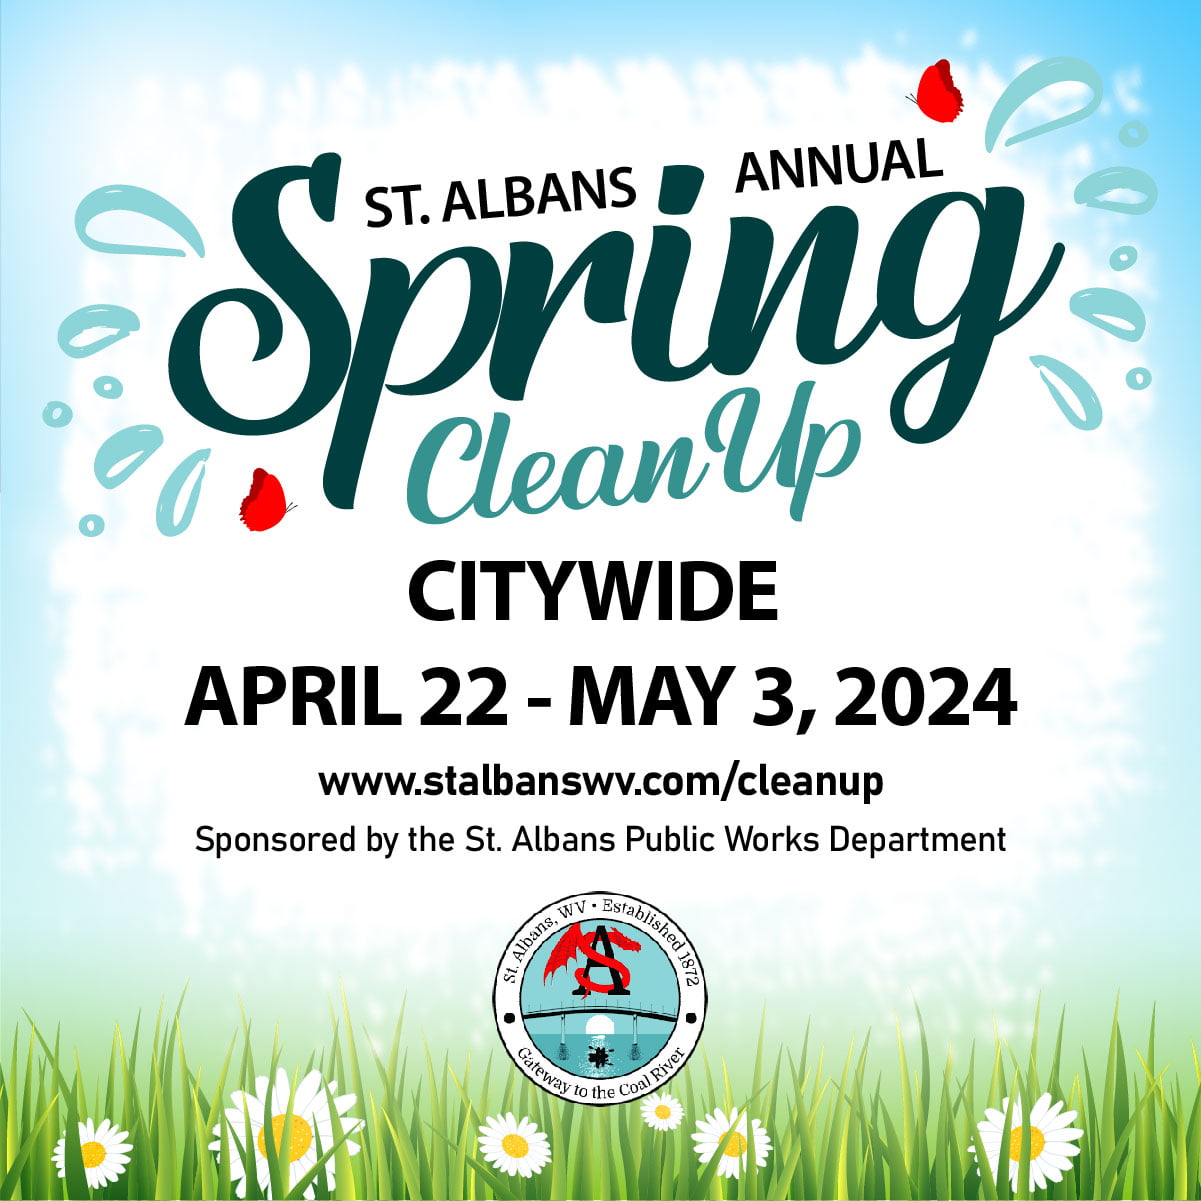 St Albans Citywide Spring Cleanup April 22 – May 3